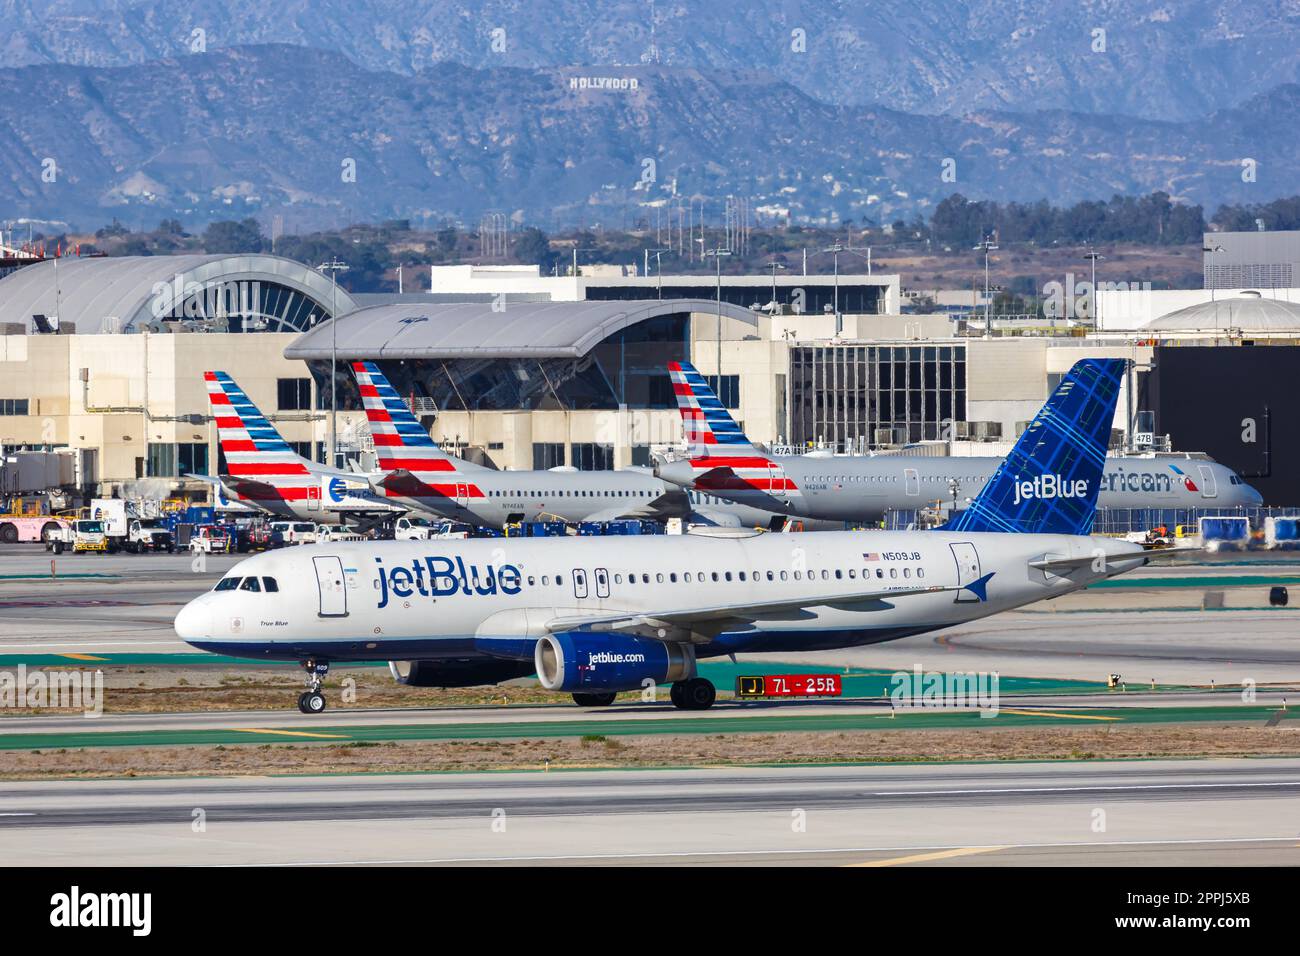 JetBlue Airbus A320 airplane at Los Angeles airport in the United States Stock Photo